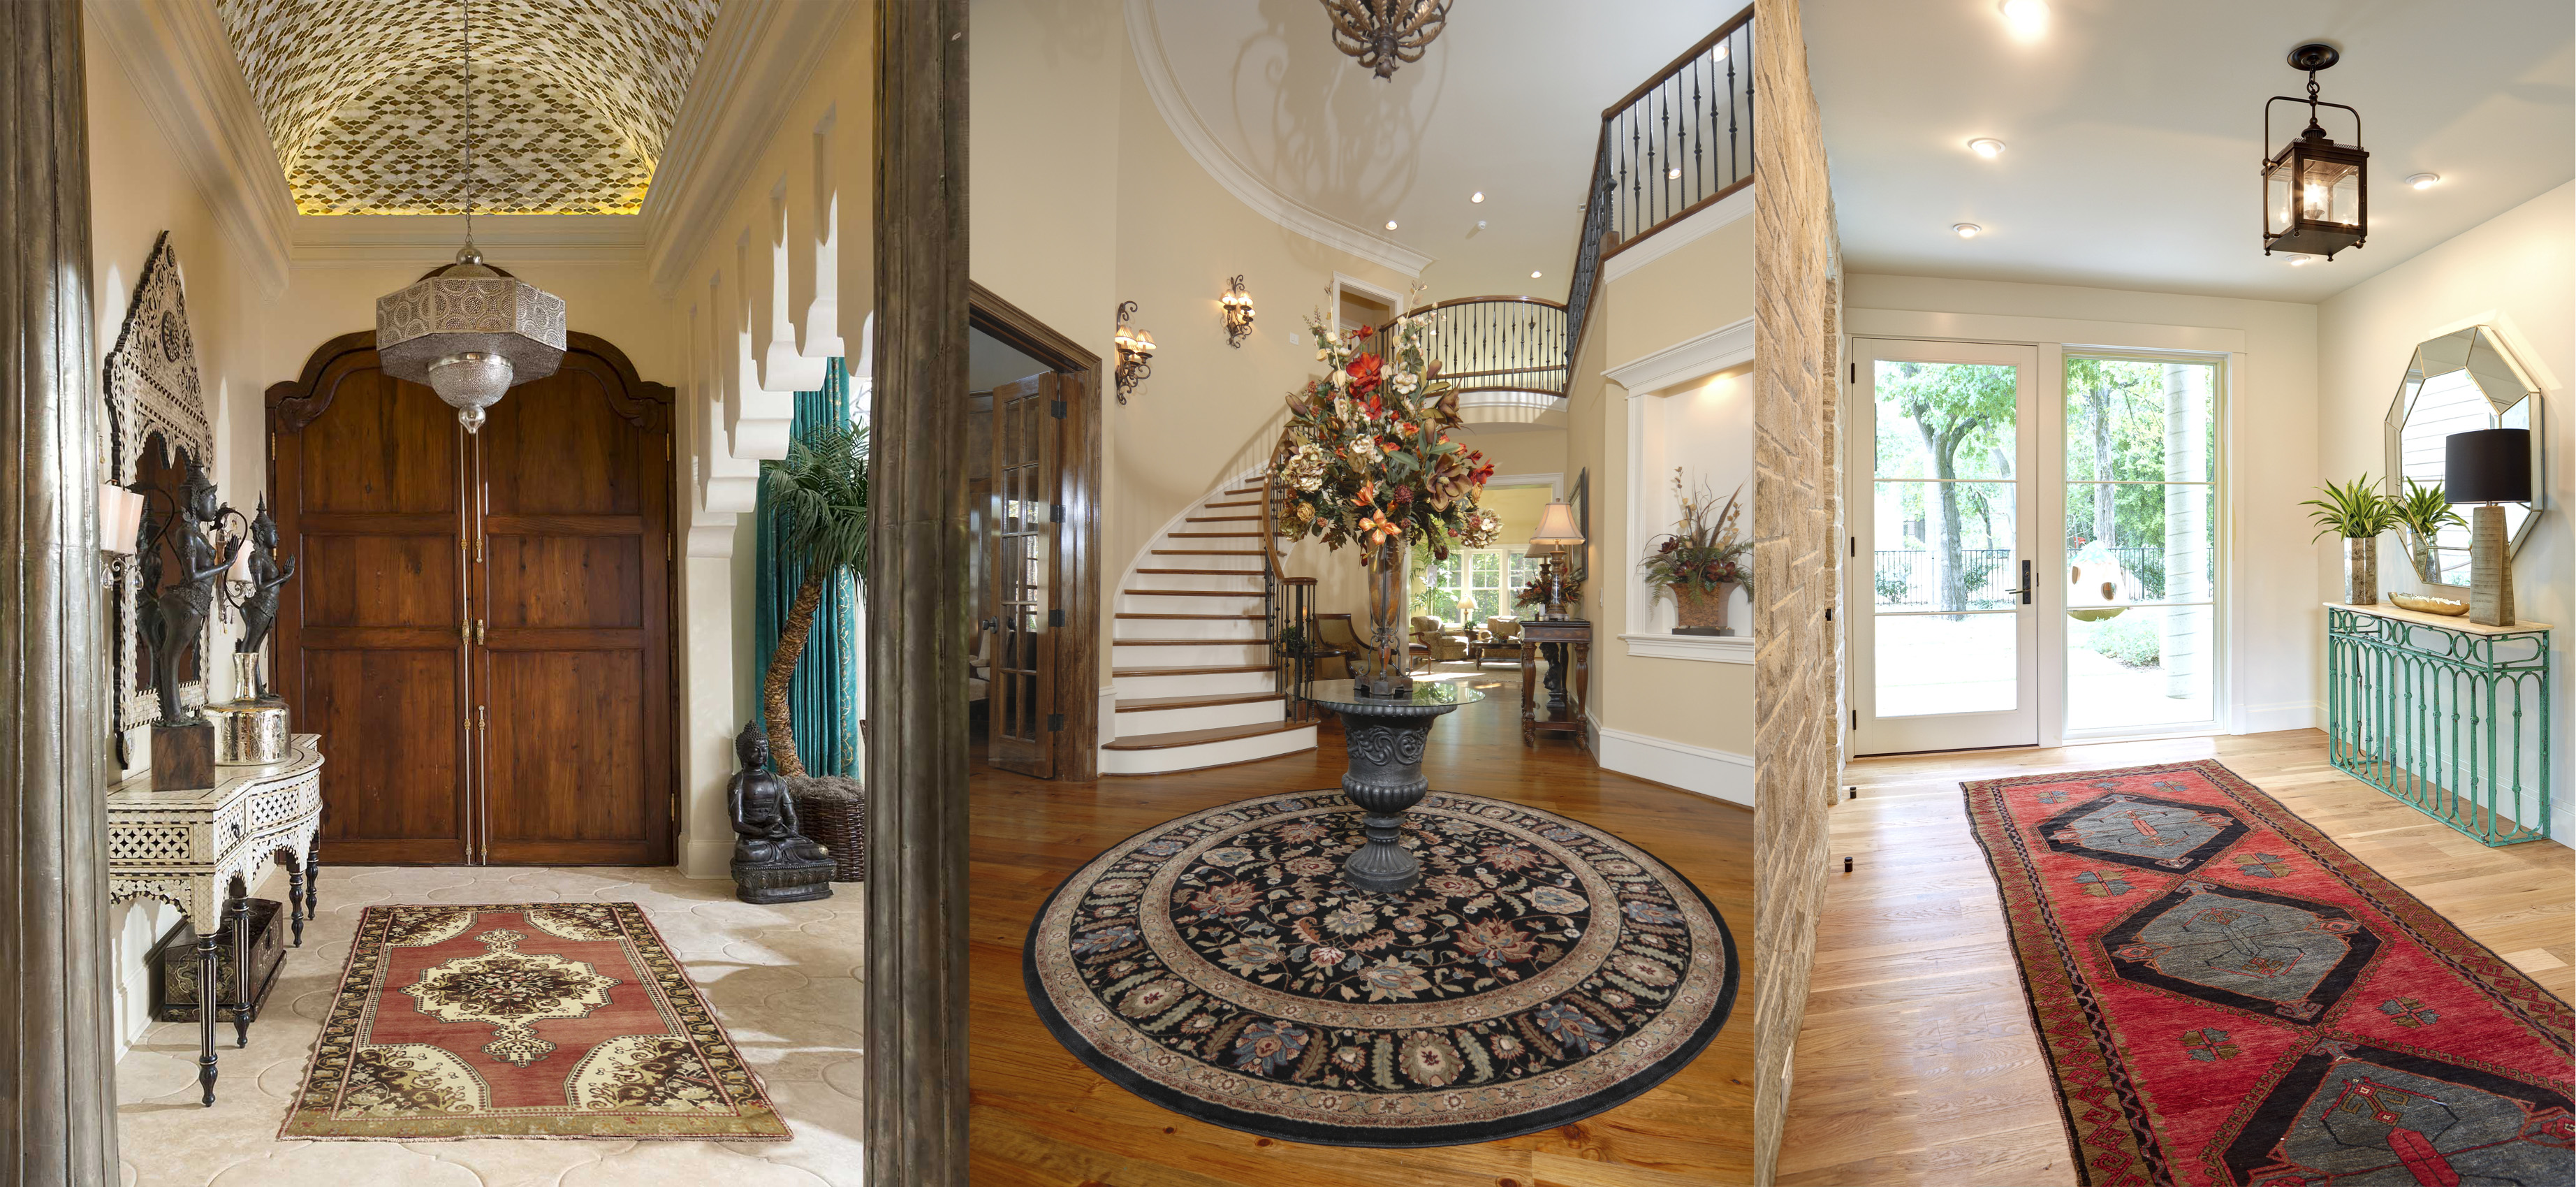 Oriental Rugs Vintage Turkish, Round Area Rugs For Entryway